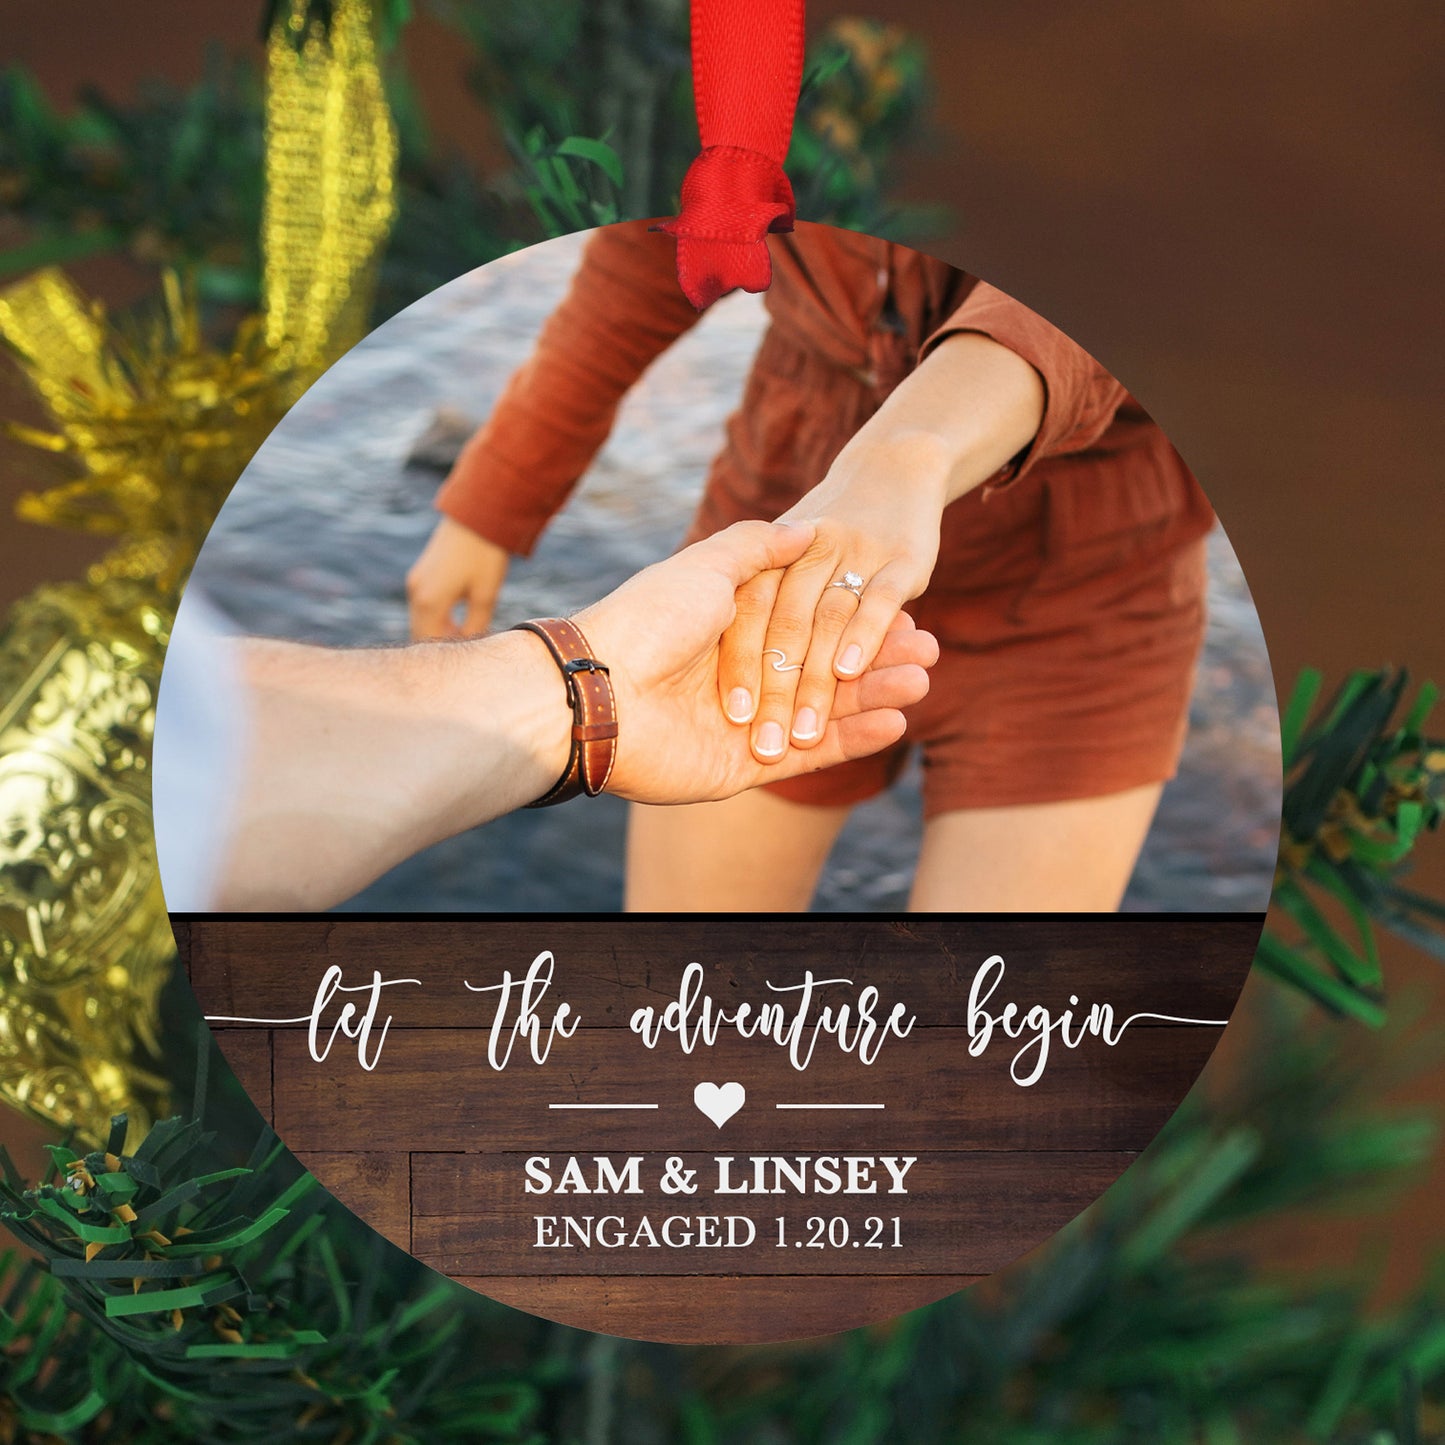 Personalized Engagement Ornament, Engagement Party Gift - 4" x 6" Wood Ornament - Let The Adventure Begin Custom, Engagement Gift with Names